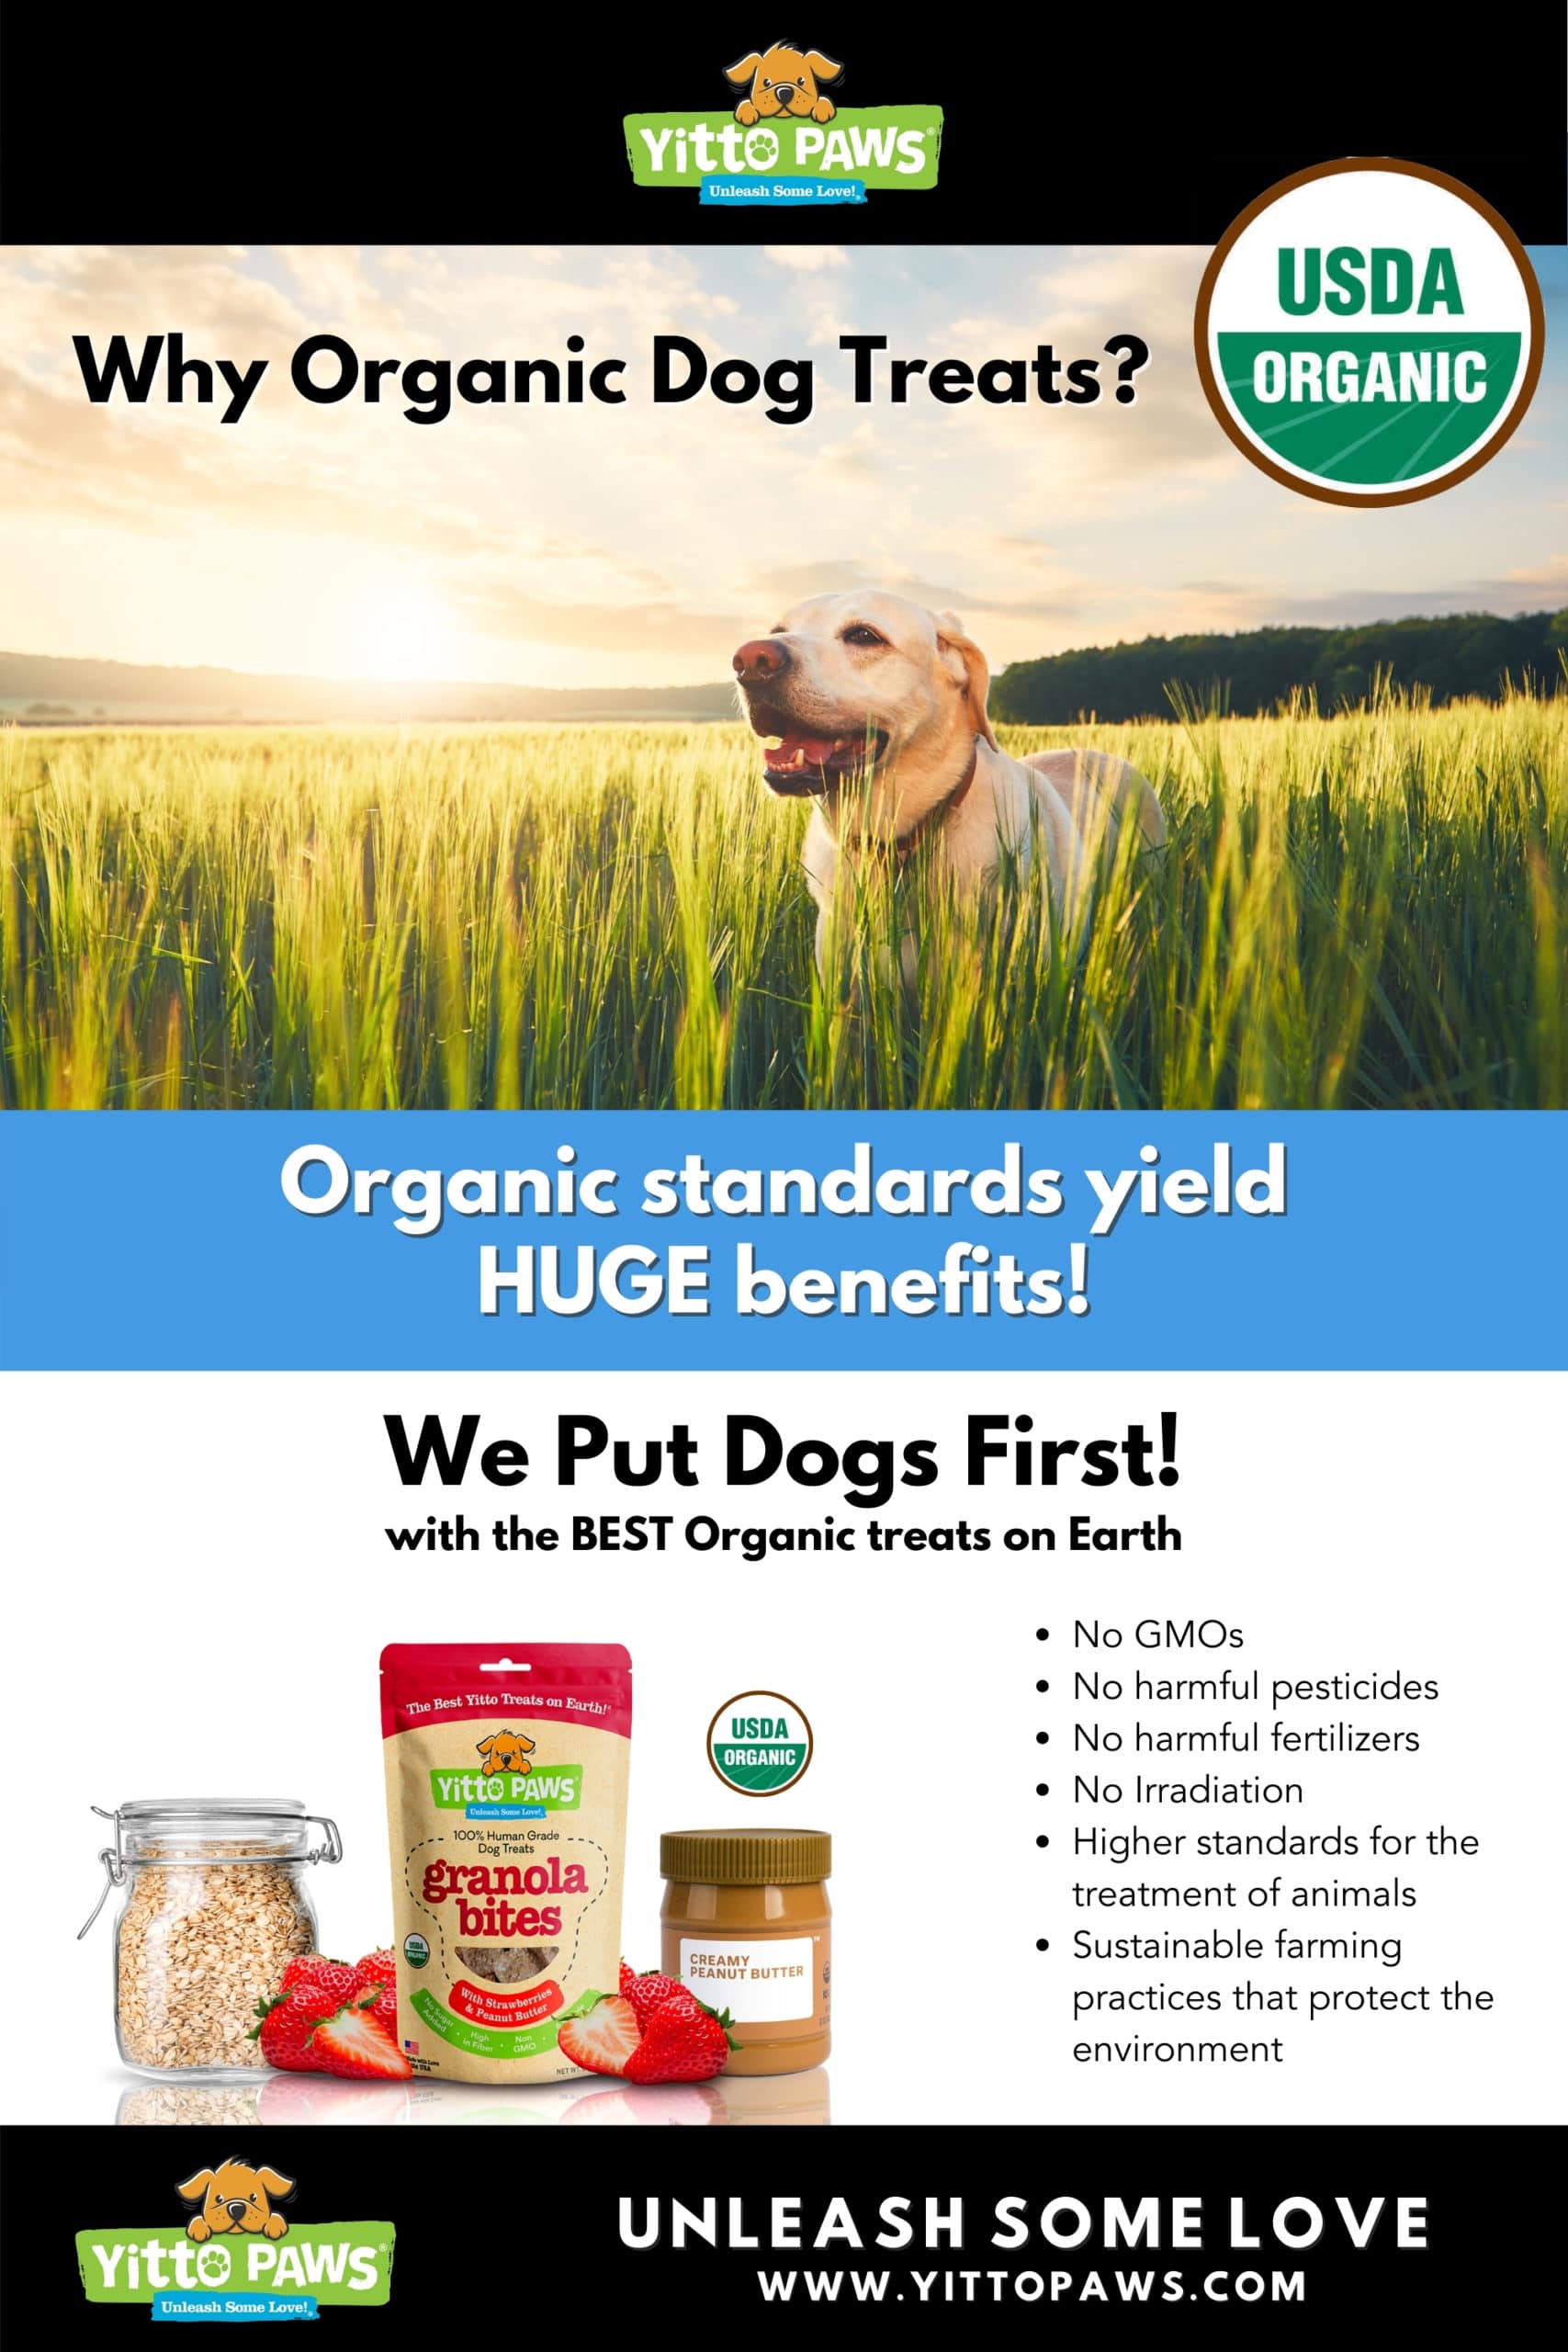 Why are organic dog treats important? Organic standards yield HUGE benefits for dogs and our environment!